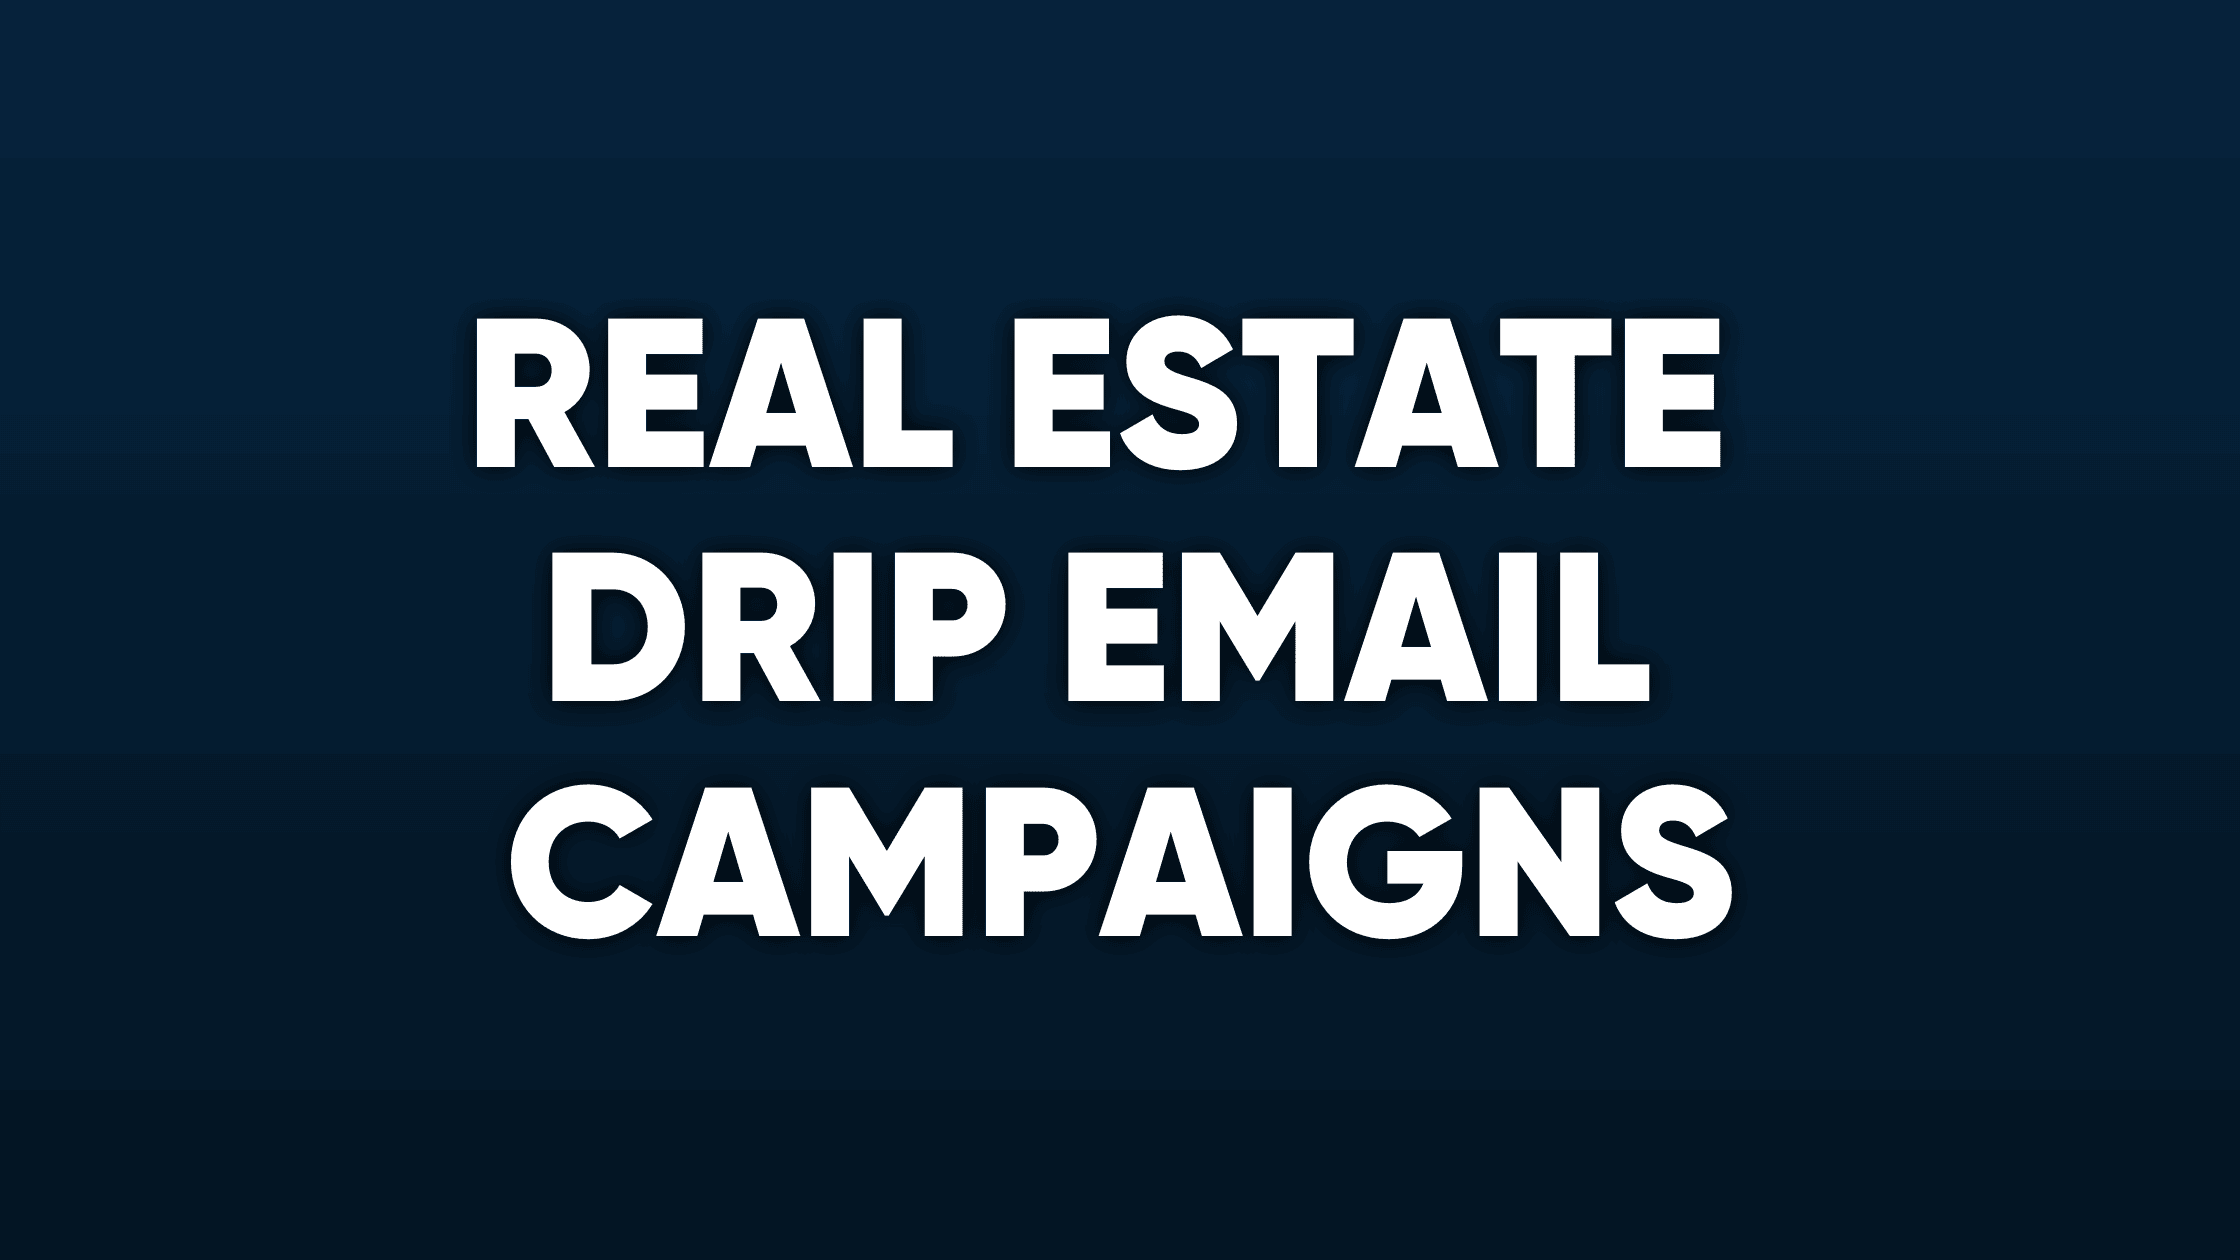 The Ultimate Guide to Understanding Real Estate Drip Email Campaigns